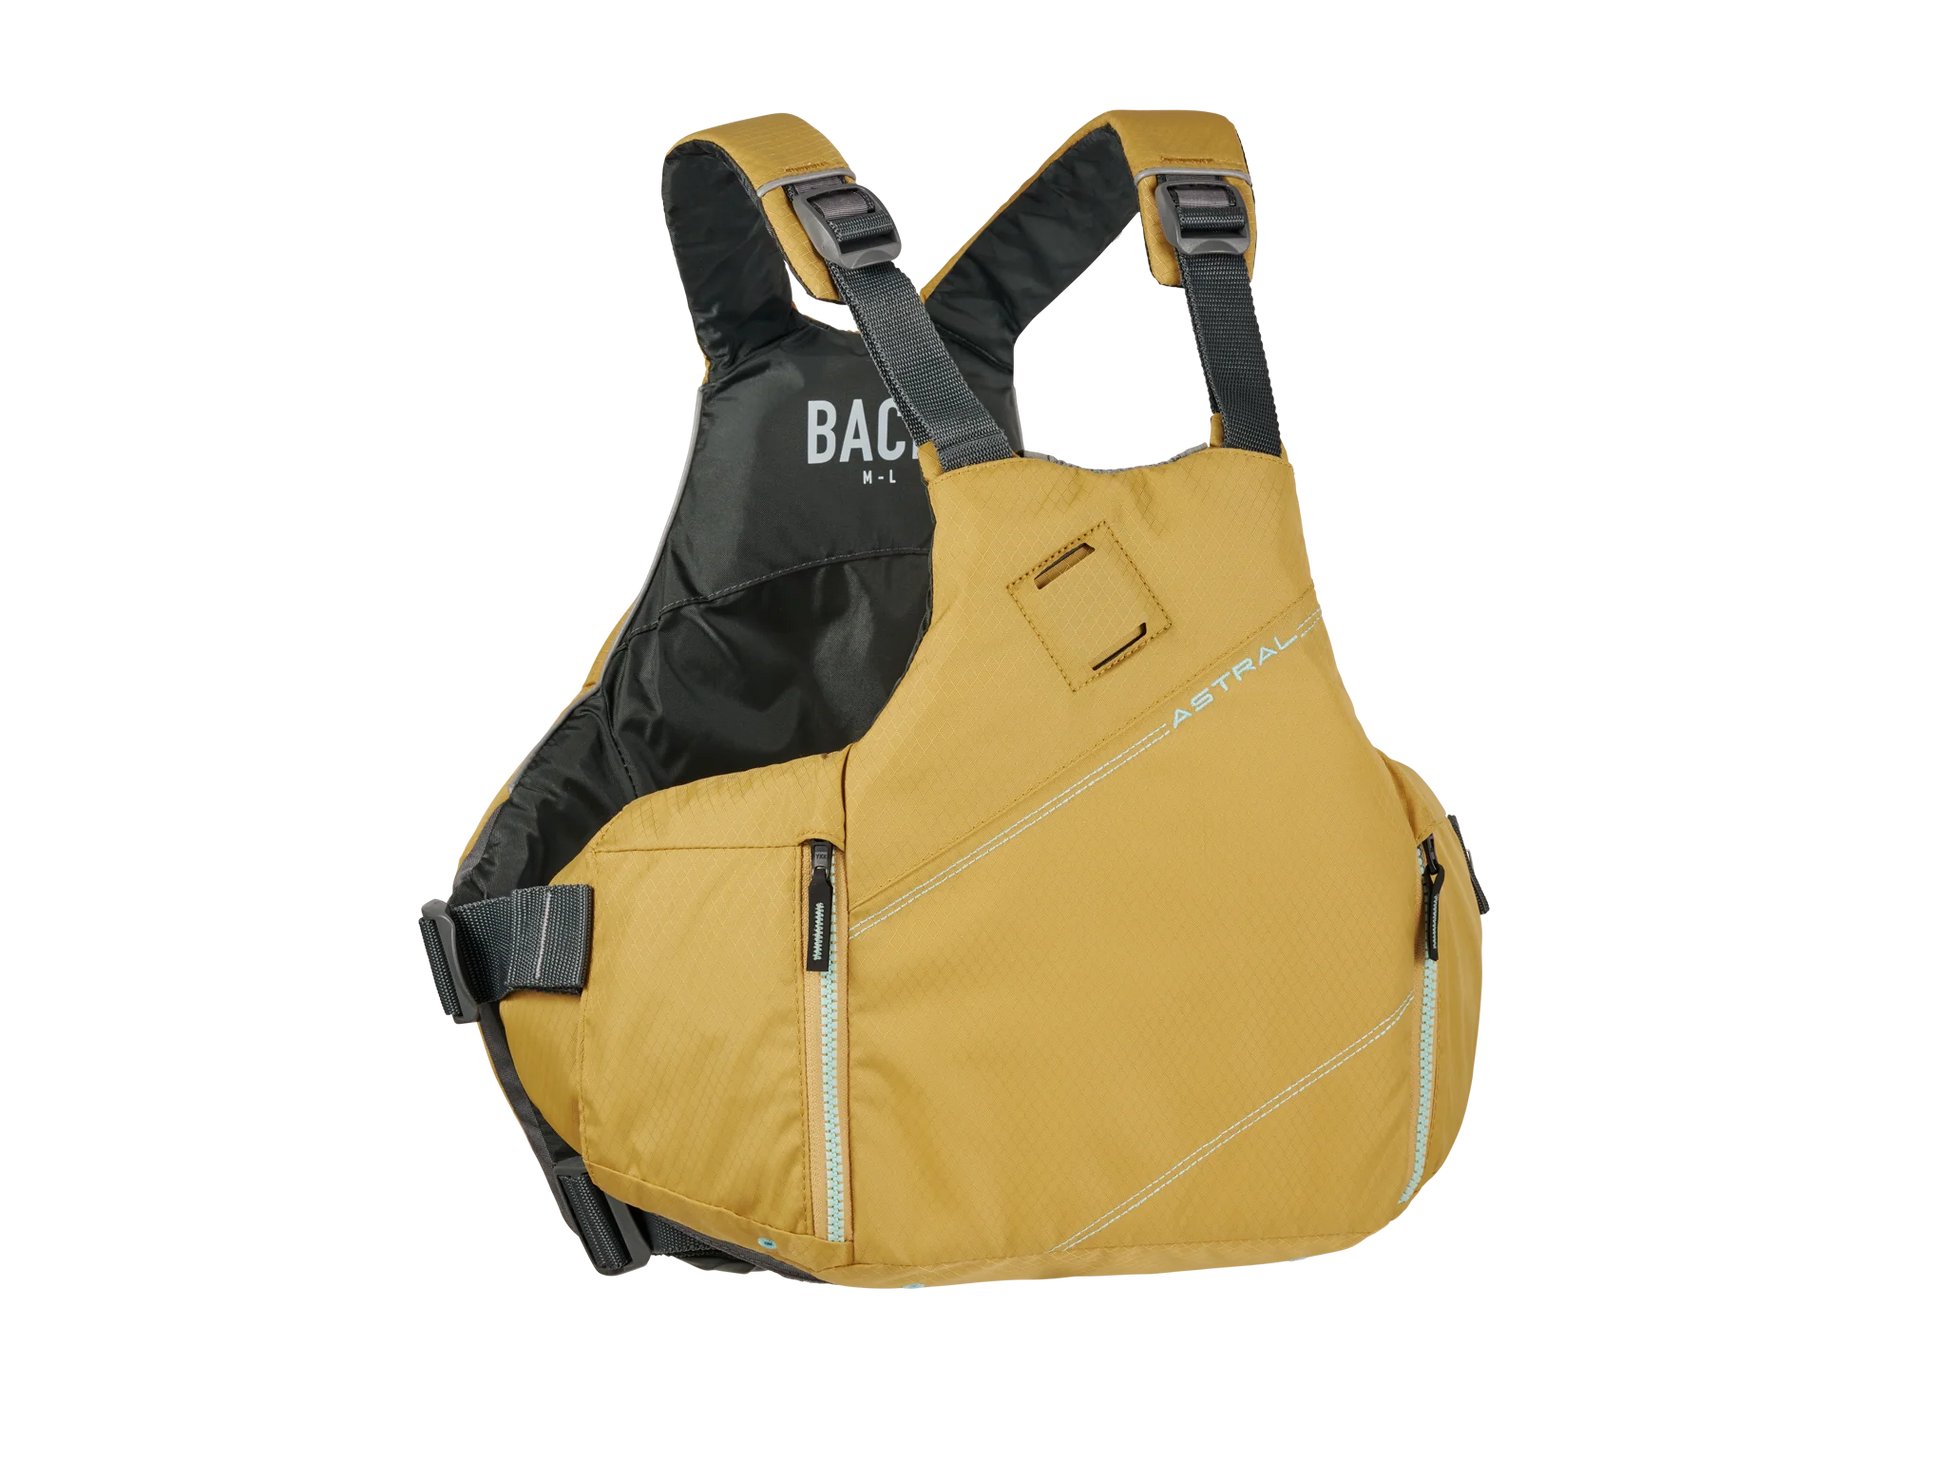 An Astral YTV 2.0 PFD is a yellow and black low profile personal flotation device.